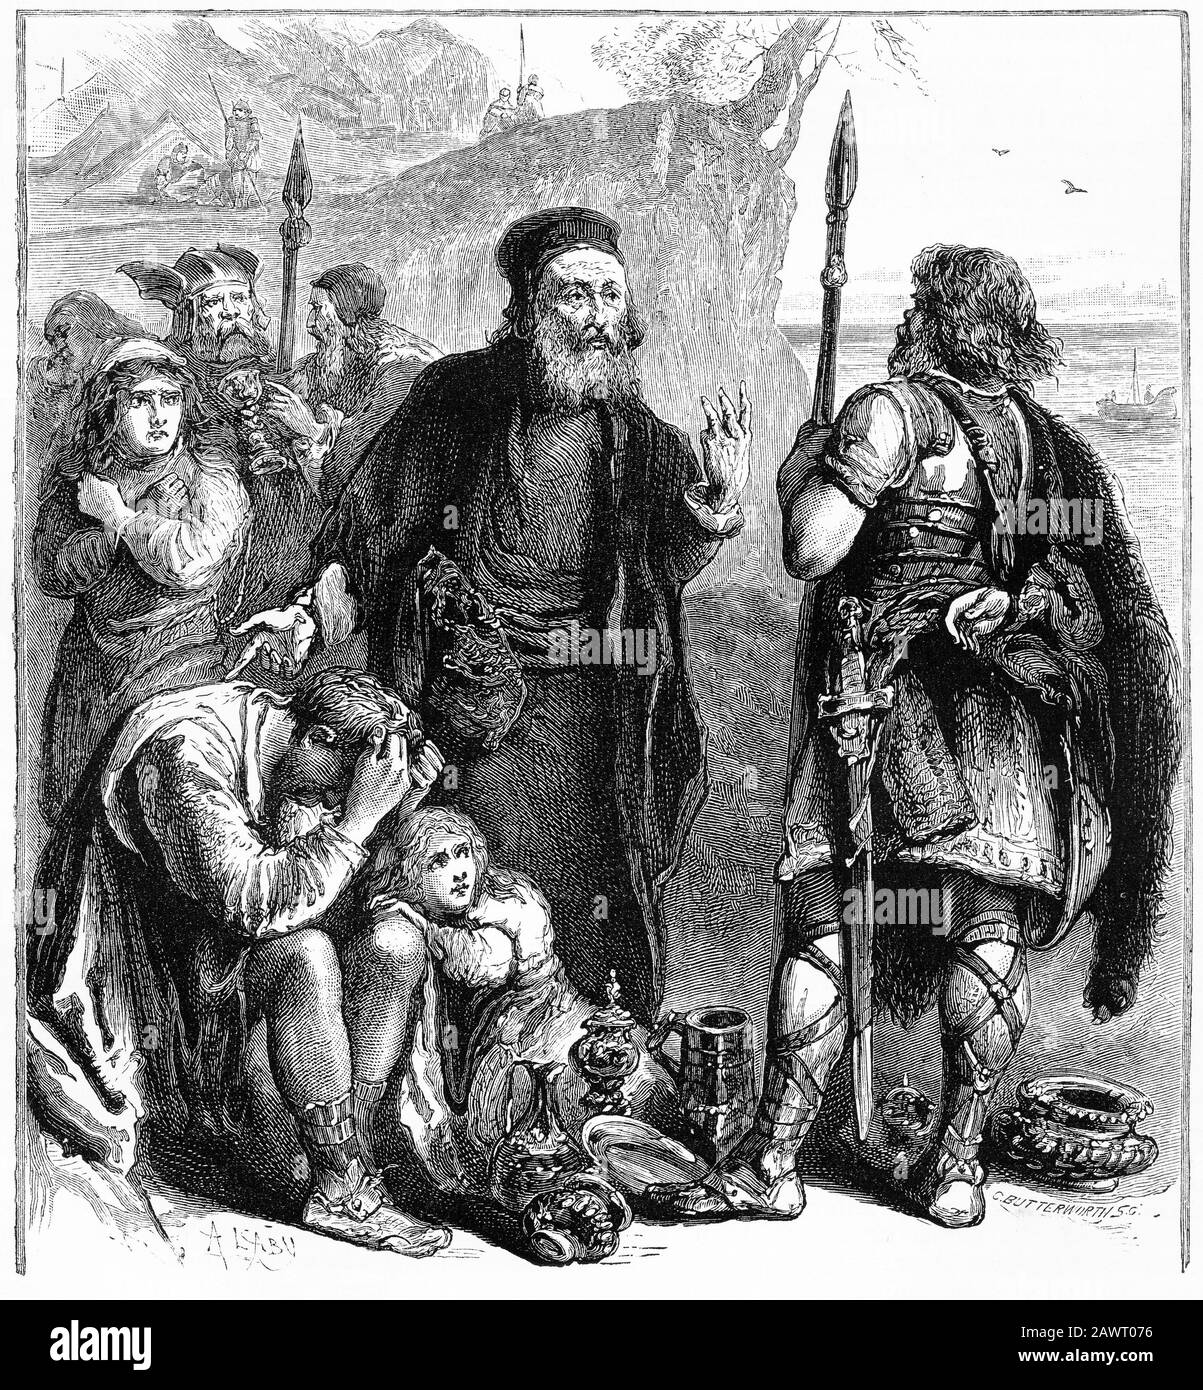 Engraving of Jews supposedly selling Christians as slaves in Europe during the 600s in Europe Stock Photo